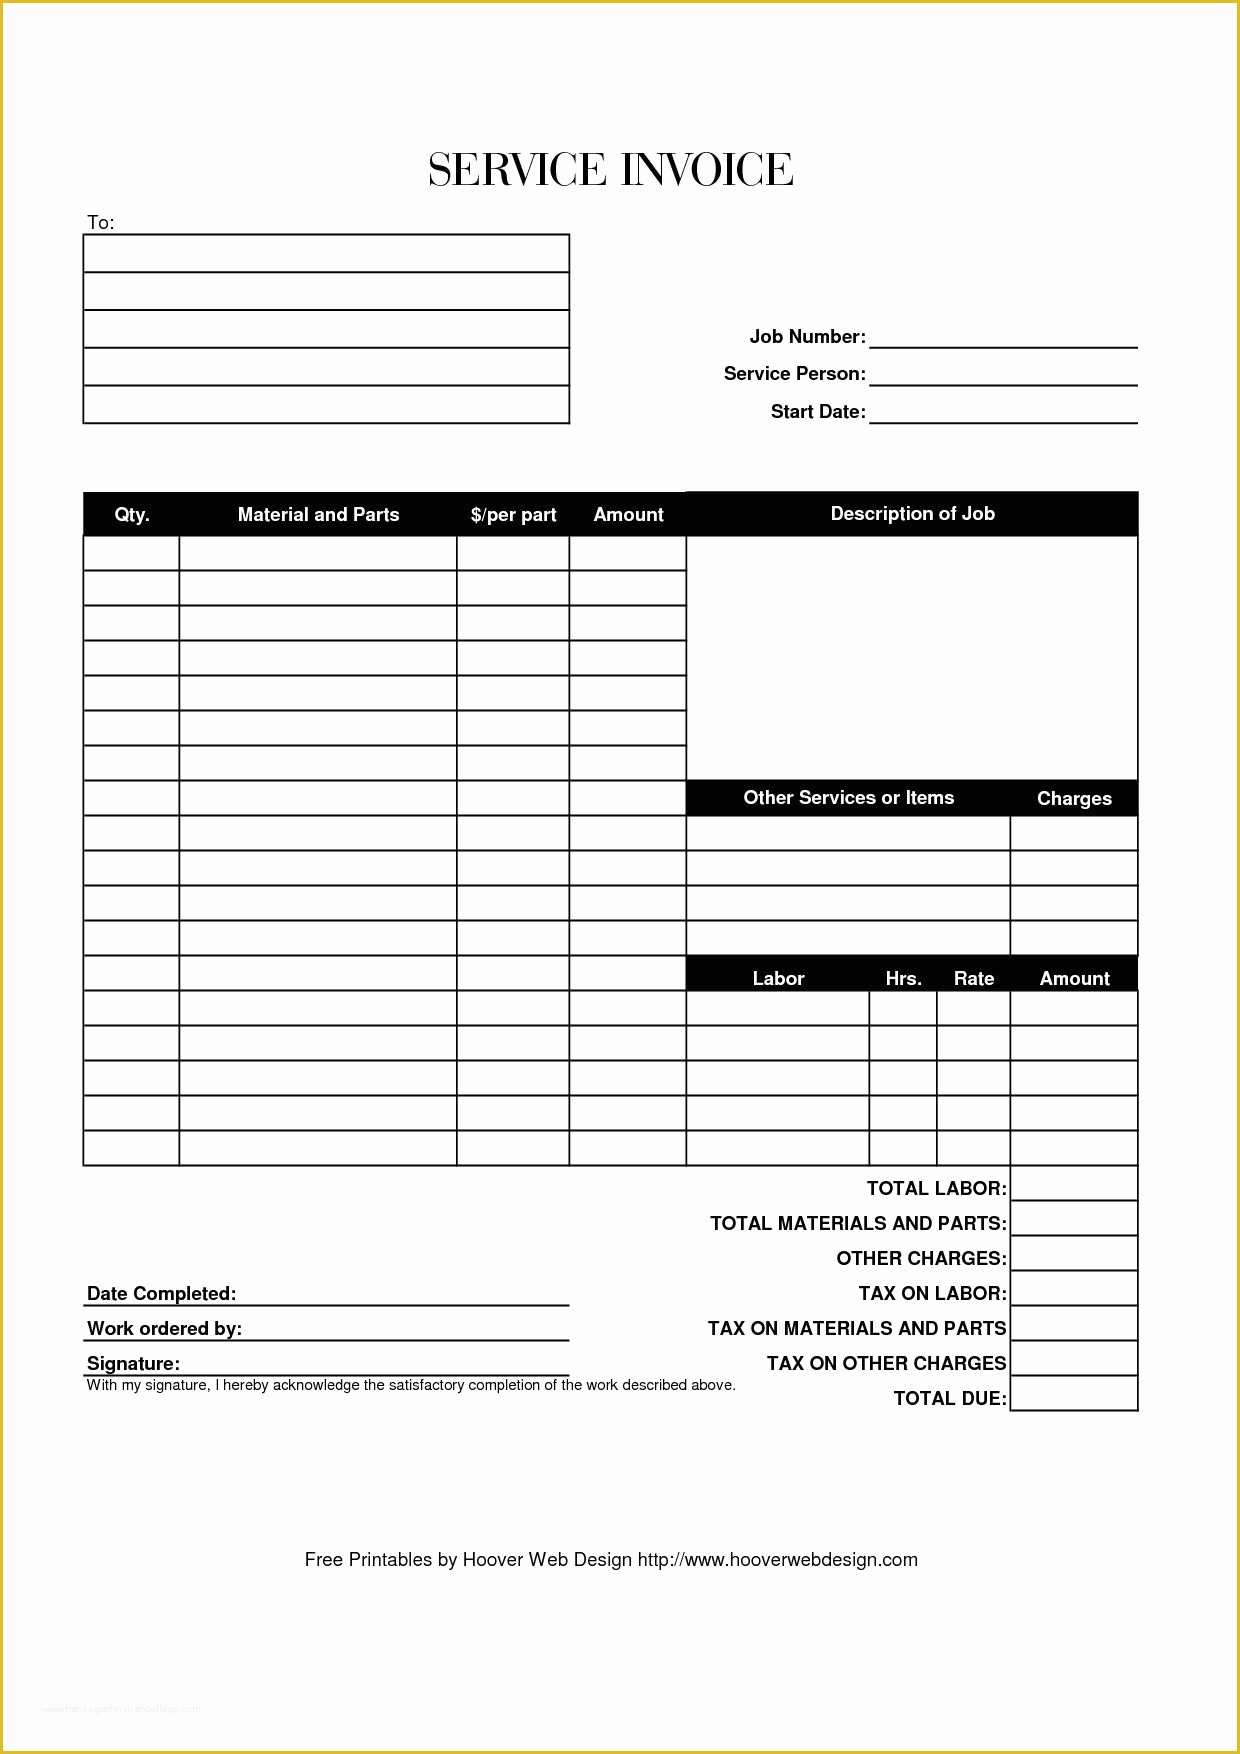 Free Service Invoice Template Excel Of Blank Service Invoice Blank Invoice Blank Service Invoice